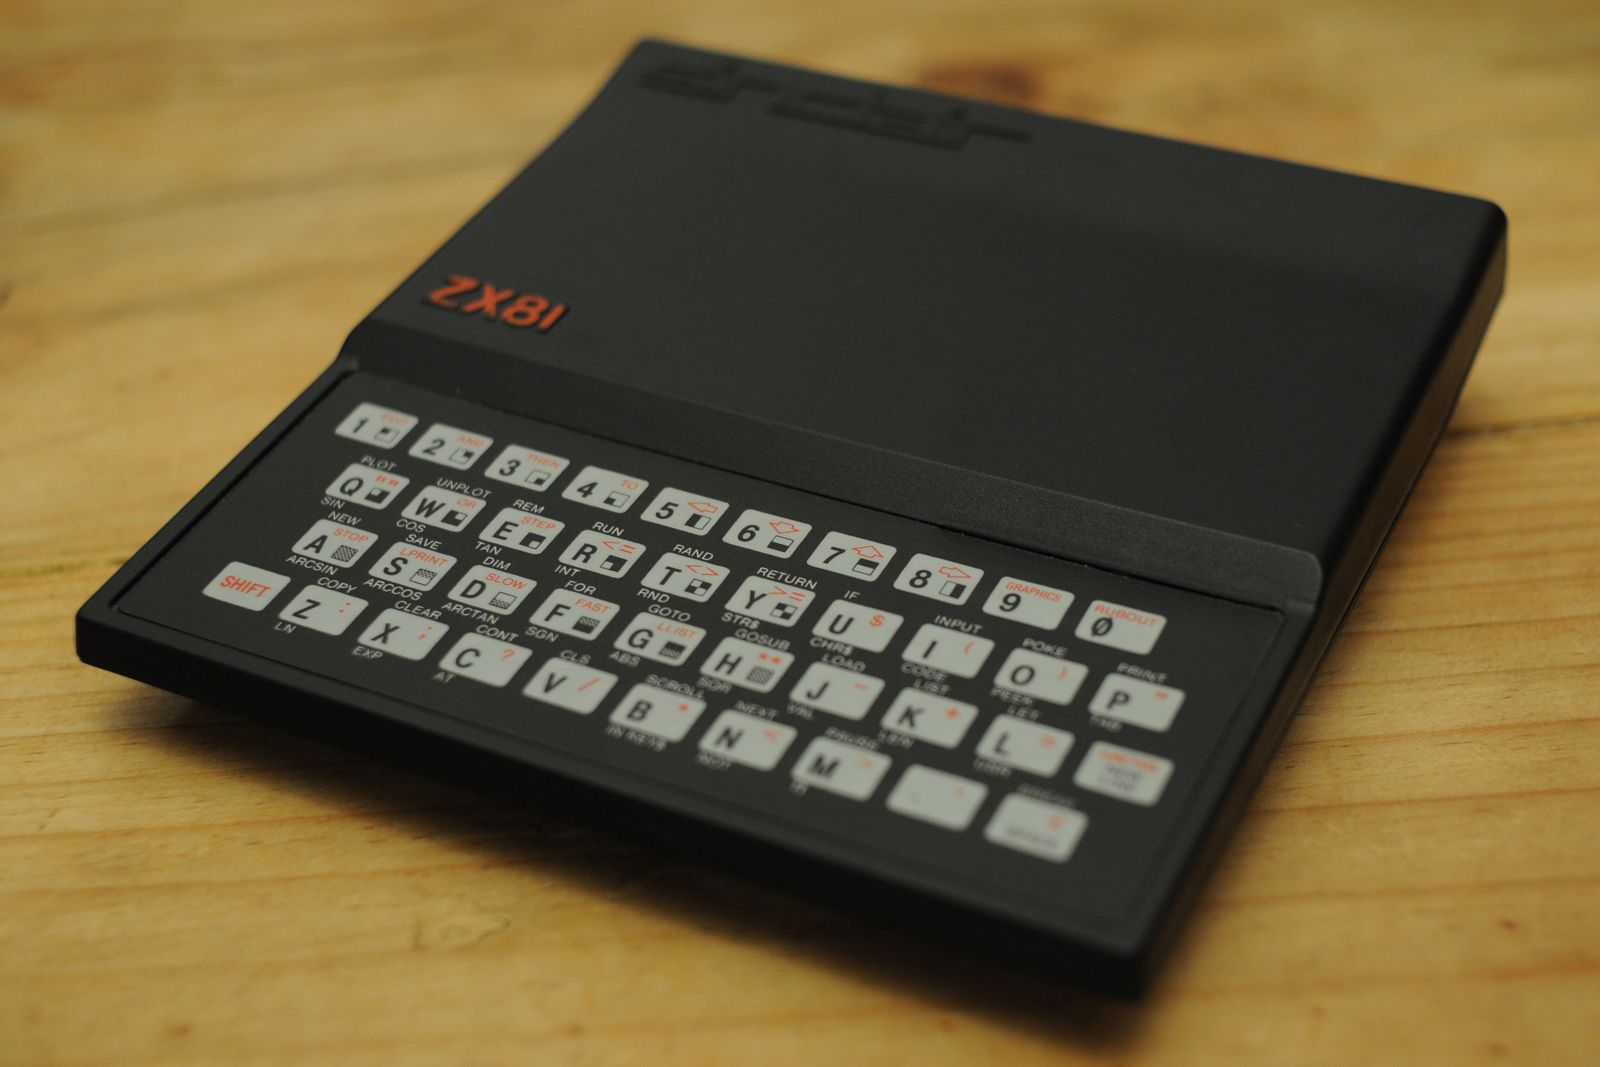 23 tech toys you wanted but never got - including the 40 year-old Sinclair ZX81